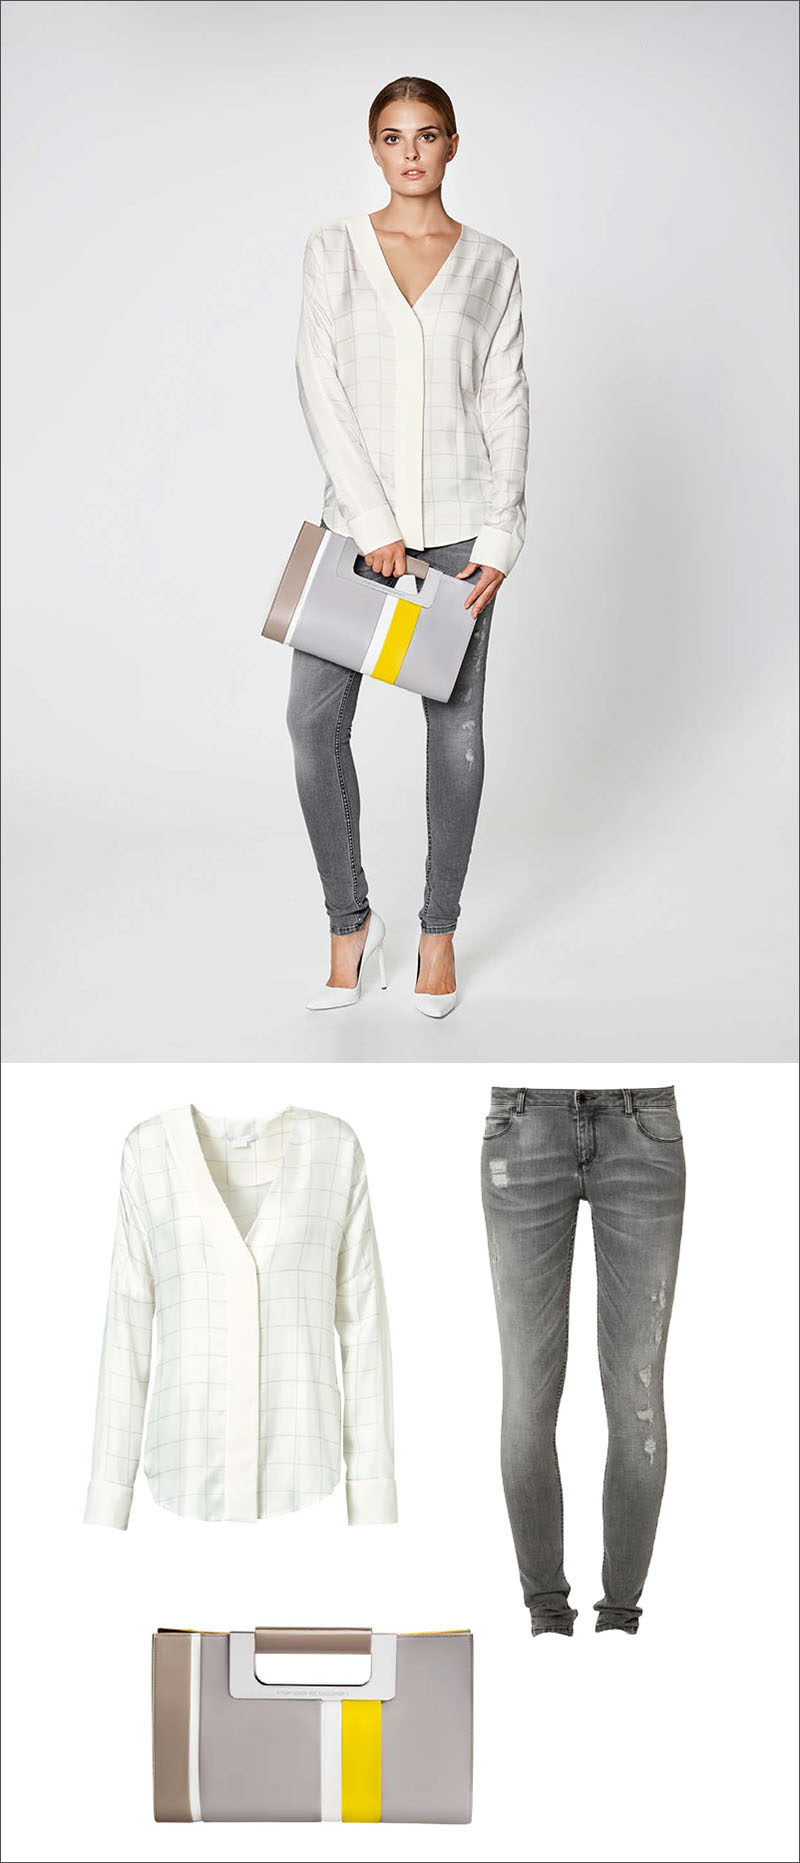 Women's Fashion Ideas - 12 Womens Outfits From Porsche Design's 2017 Spring/Summer Collection // A window pane blouse, ripped jeans, and a grey clutch with a pop of yellow create this versatile women's outfit.